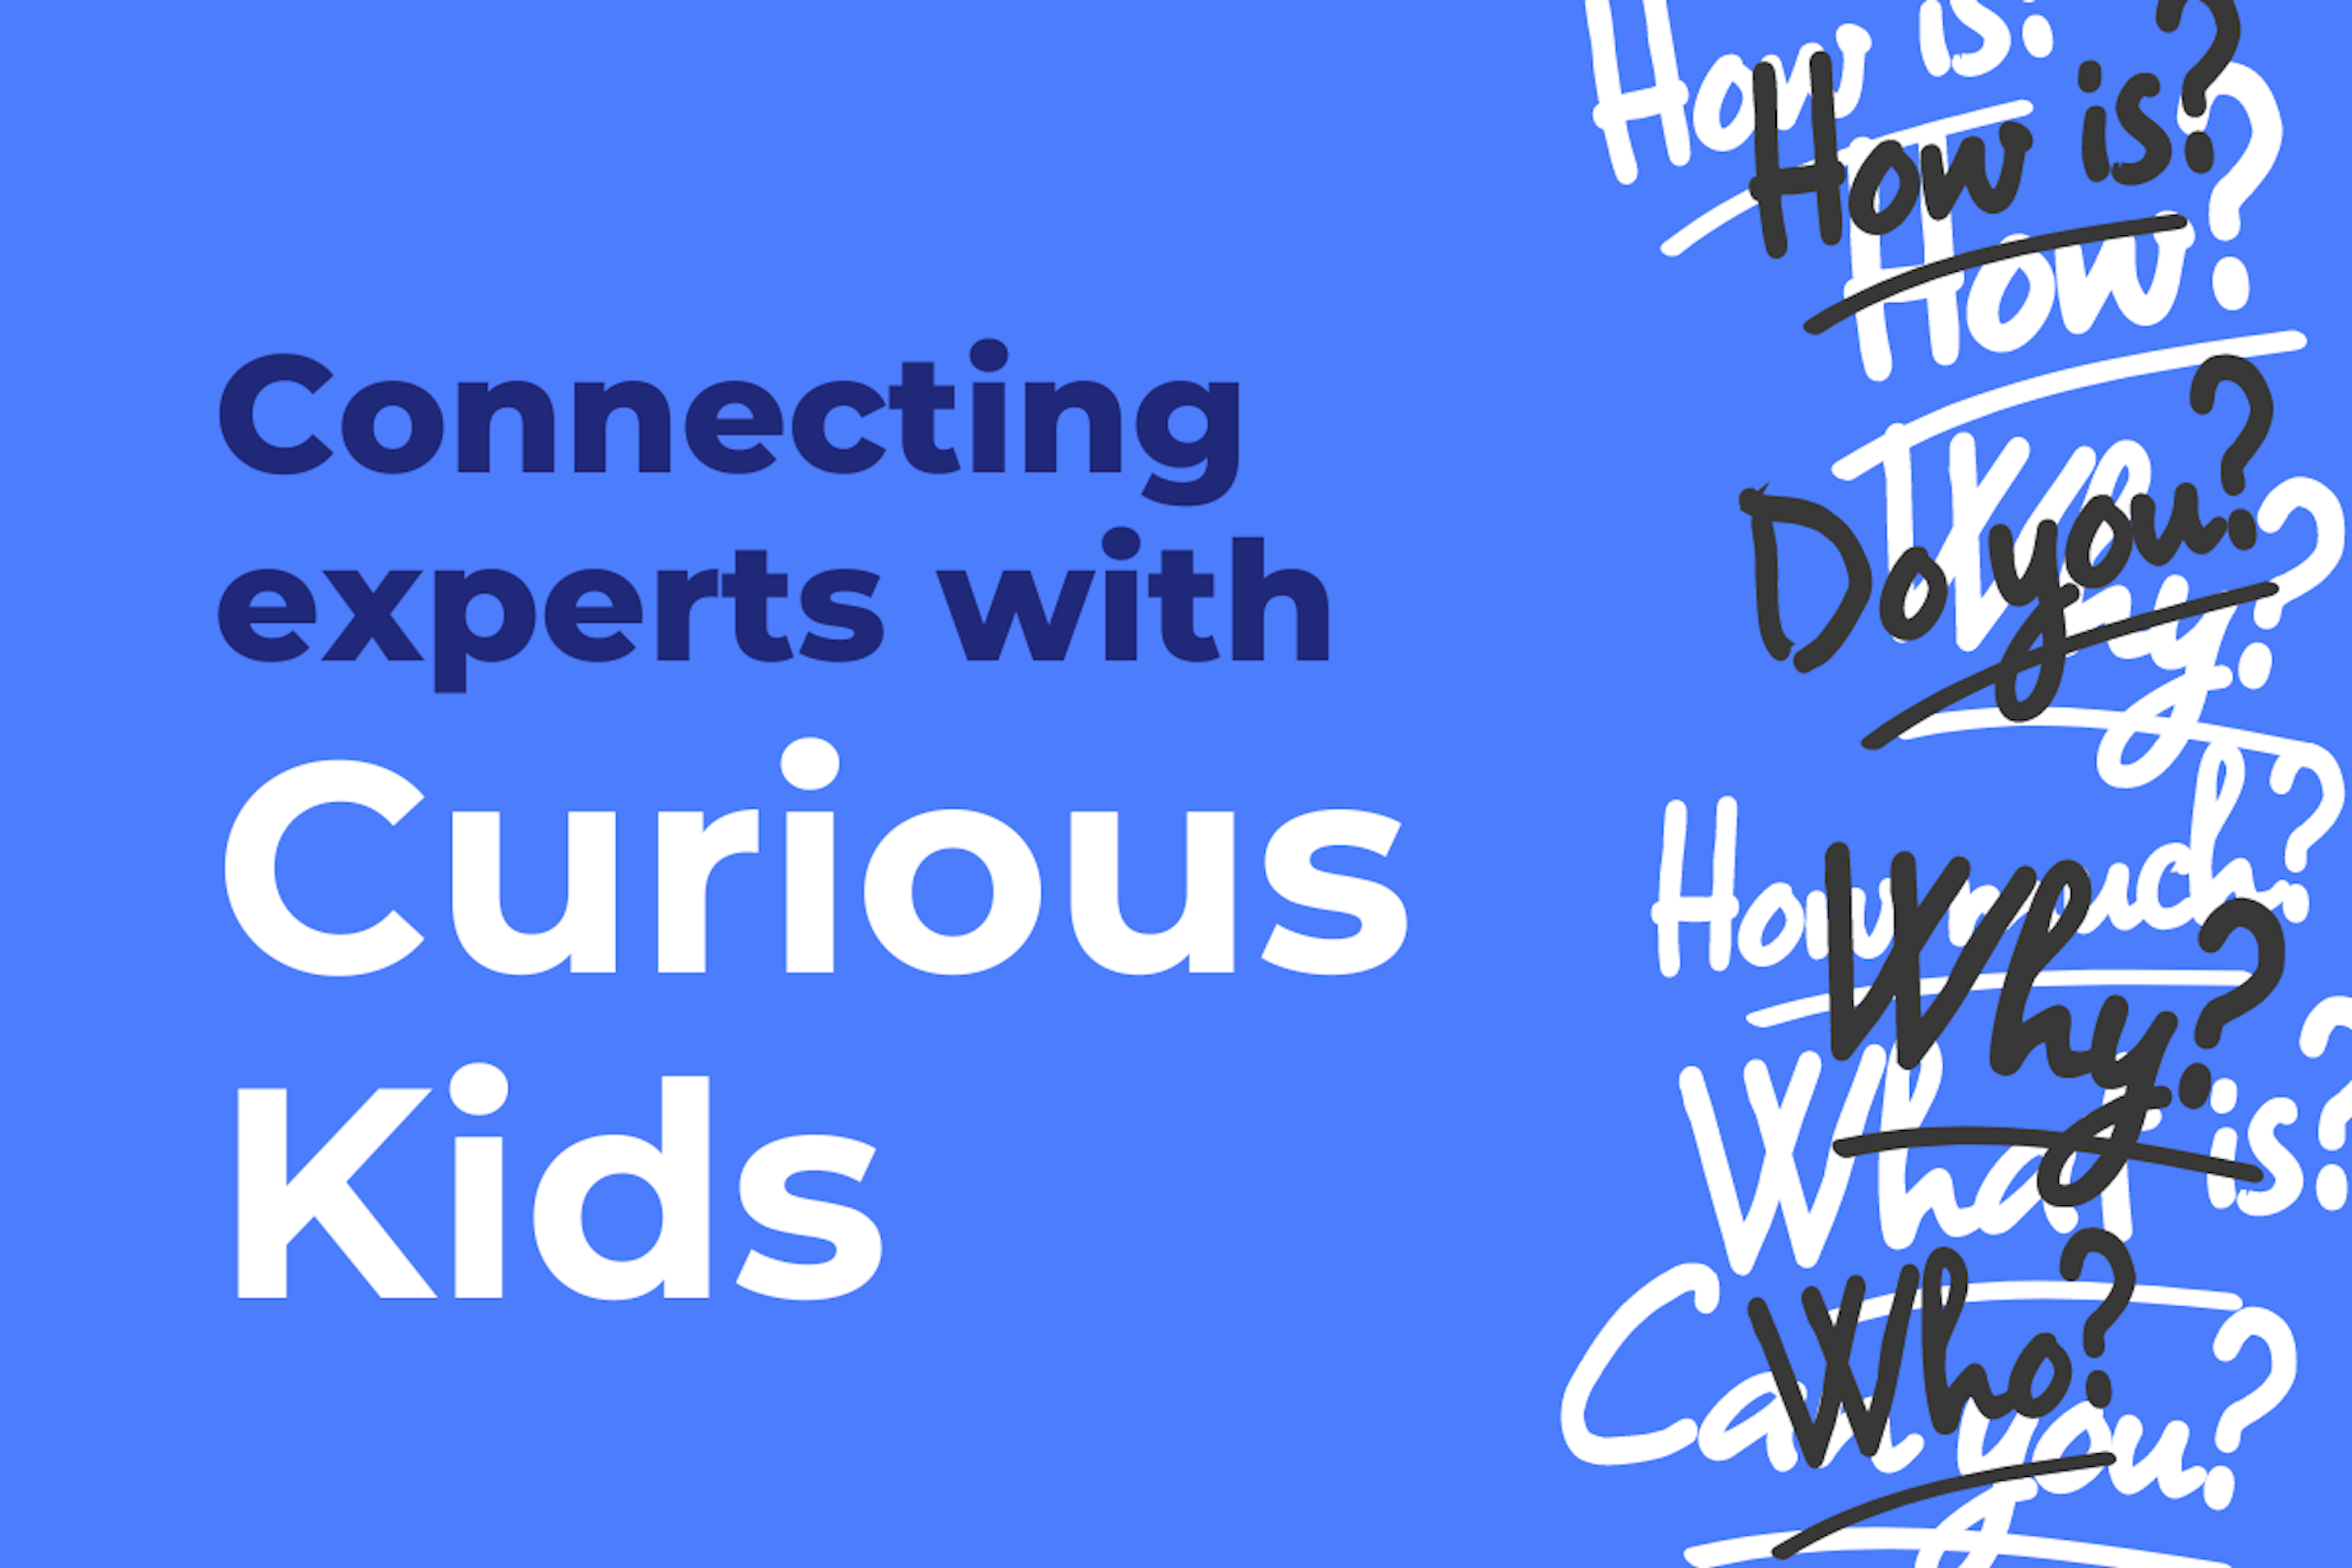 Graphic that says 'connecting experts with curious kids', with words in background saying 'how? why? who?'